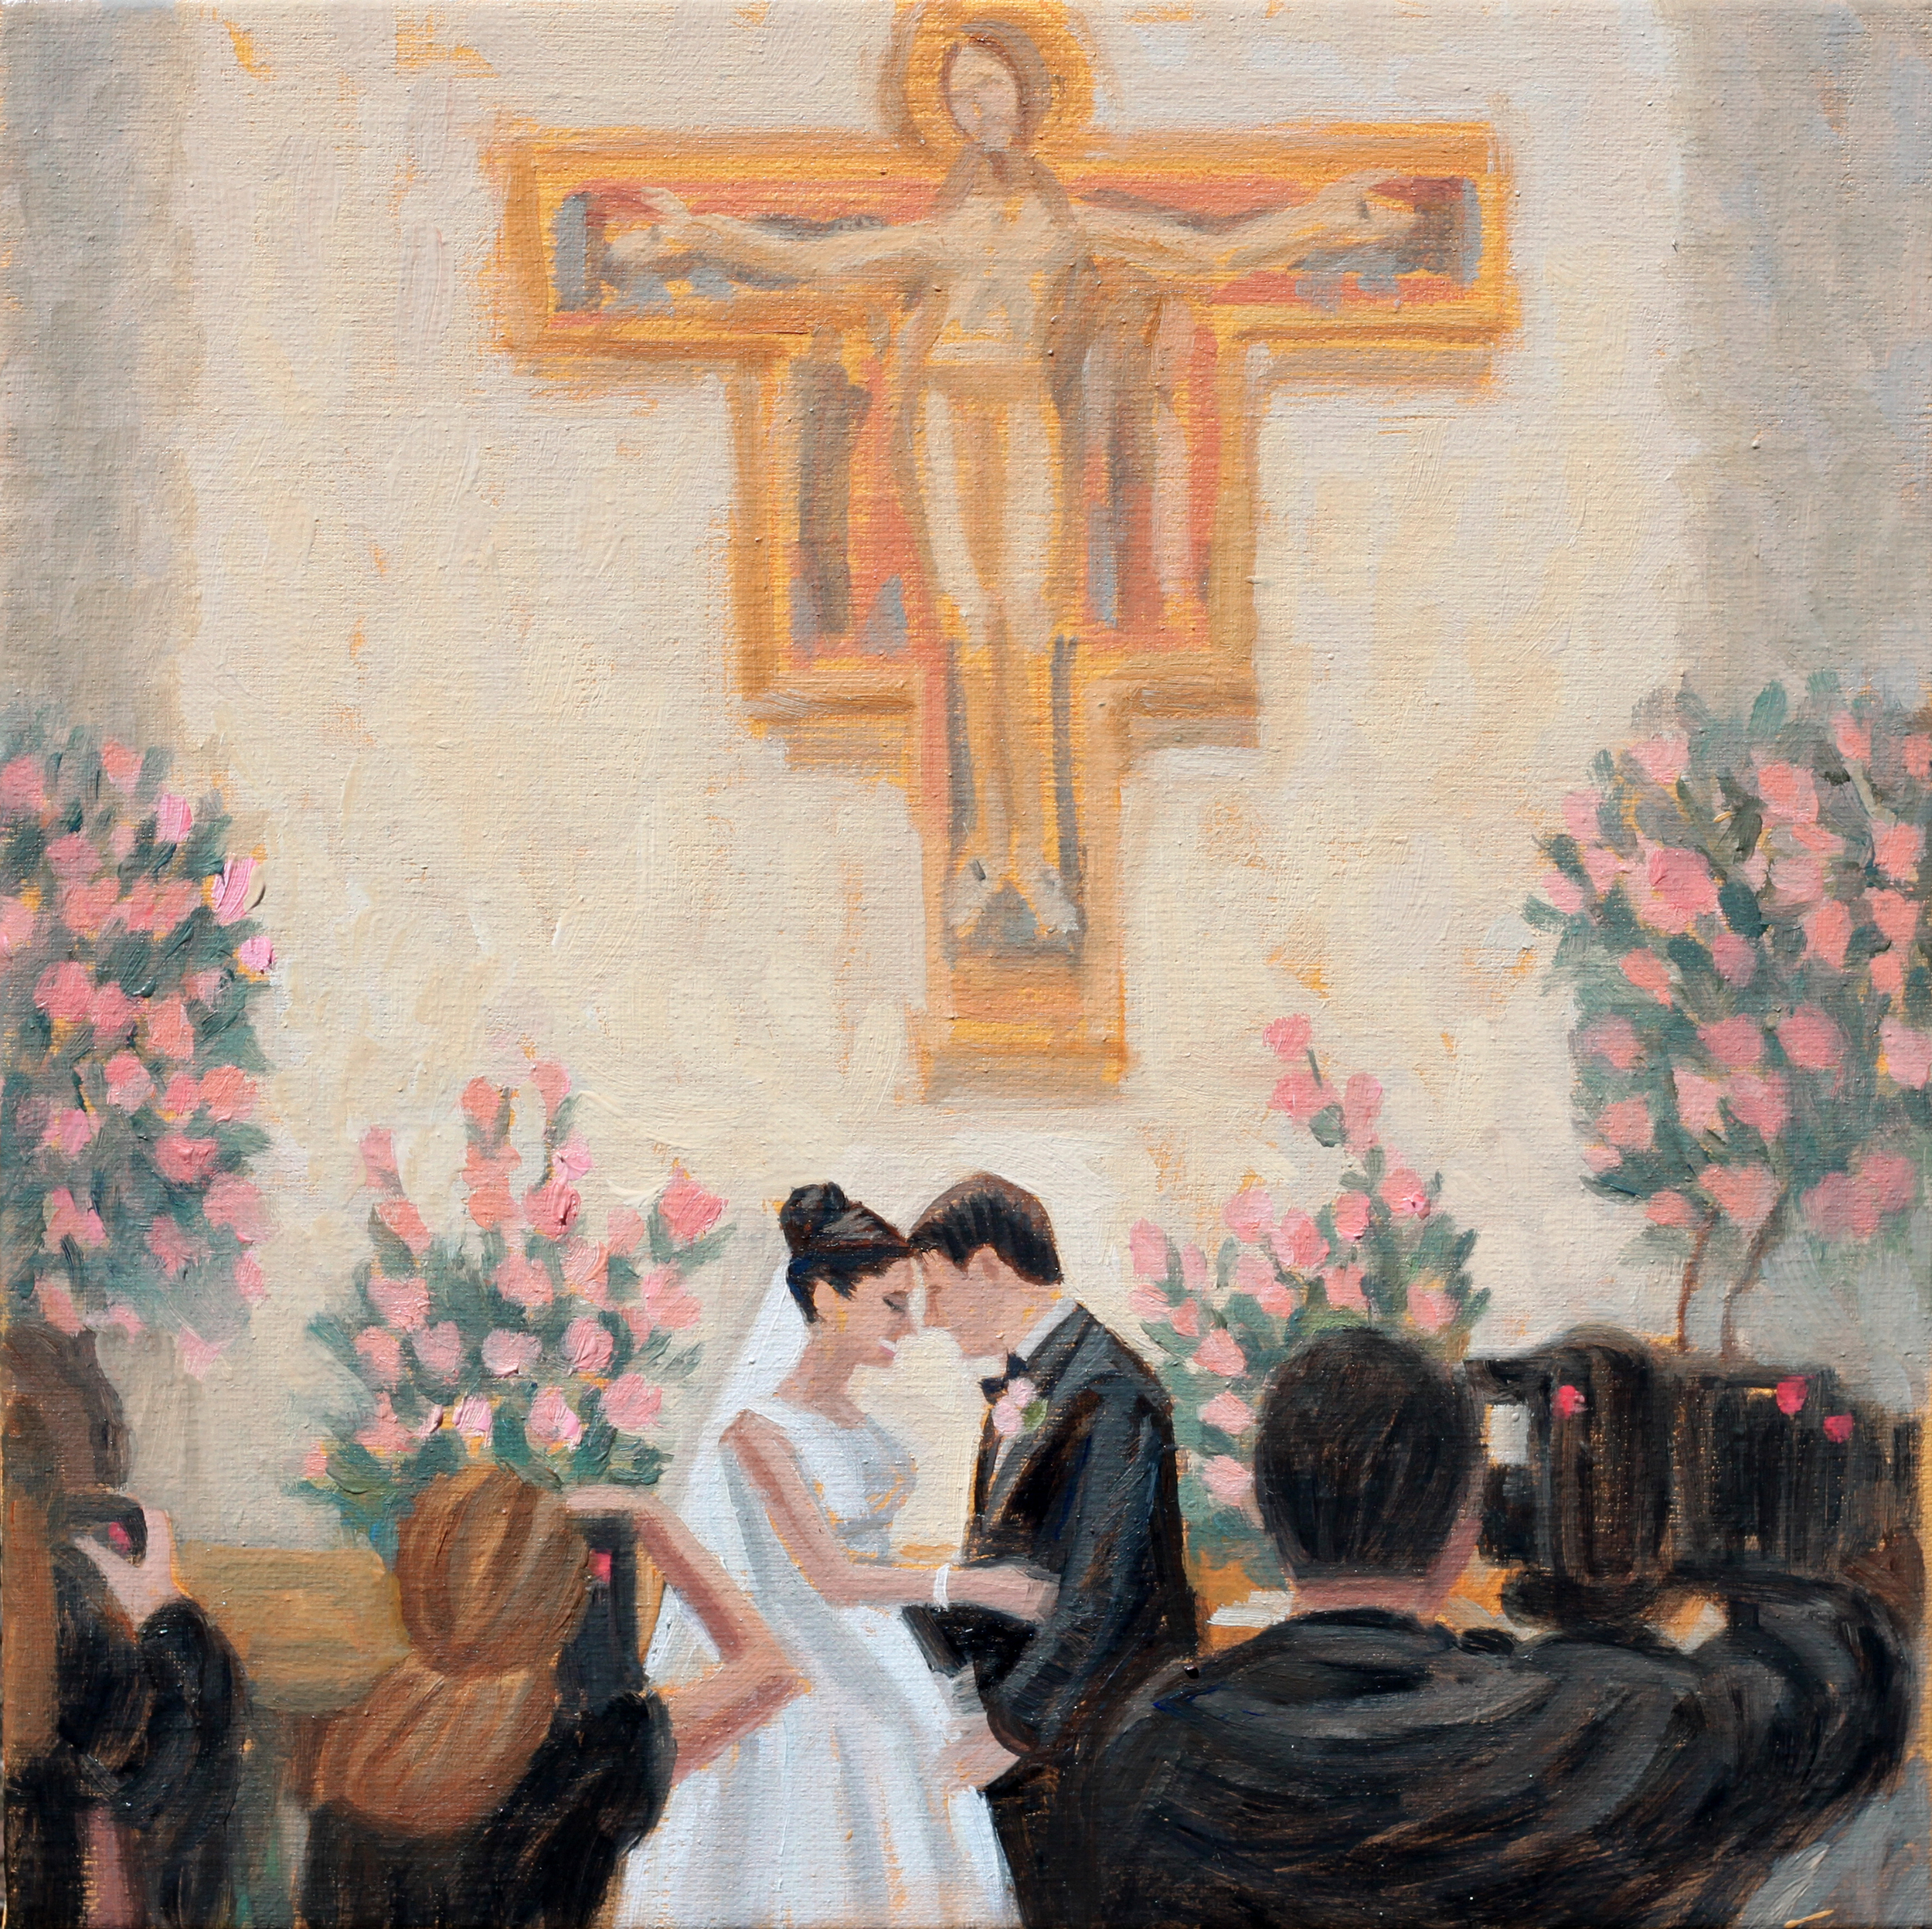 vows-painting-from-photo-perfect-wedding-gift-artist-ben-keys-painting-wed-on-canvas